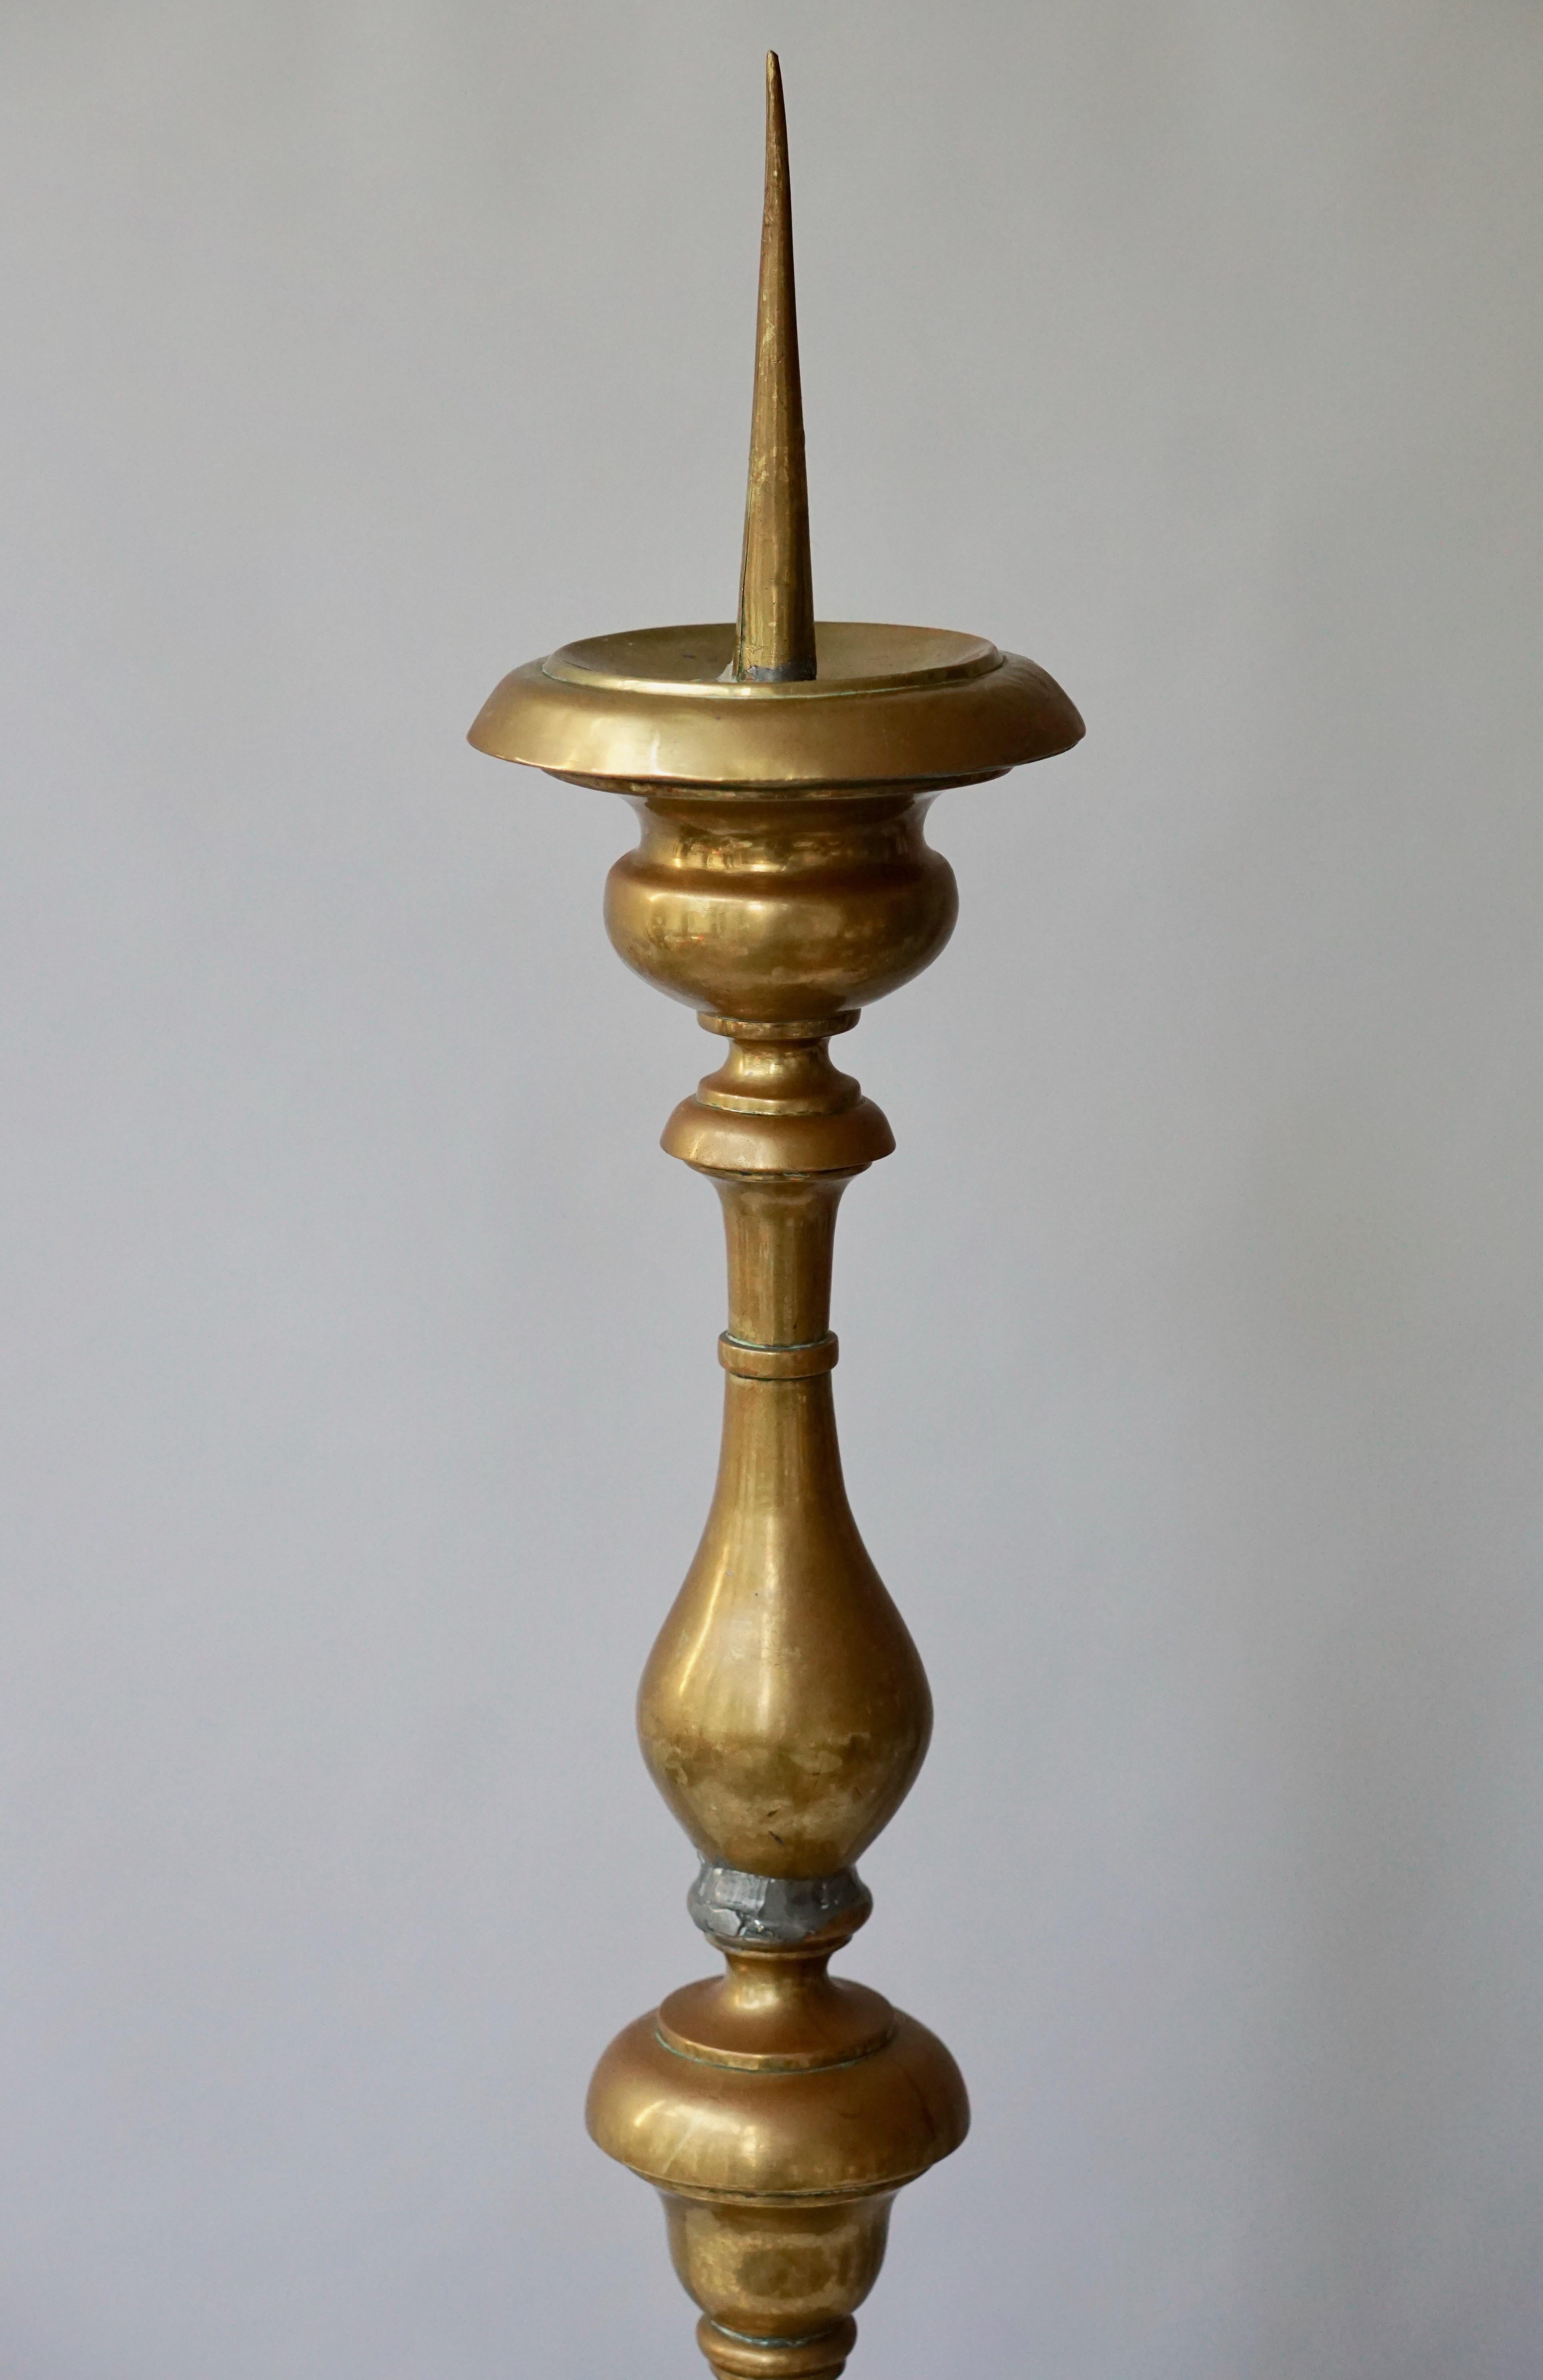 Polished Brass Tall Torchere, Candlestick or Prickets, 19th Century For Sale 4